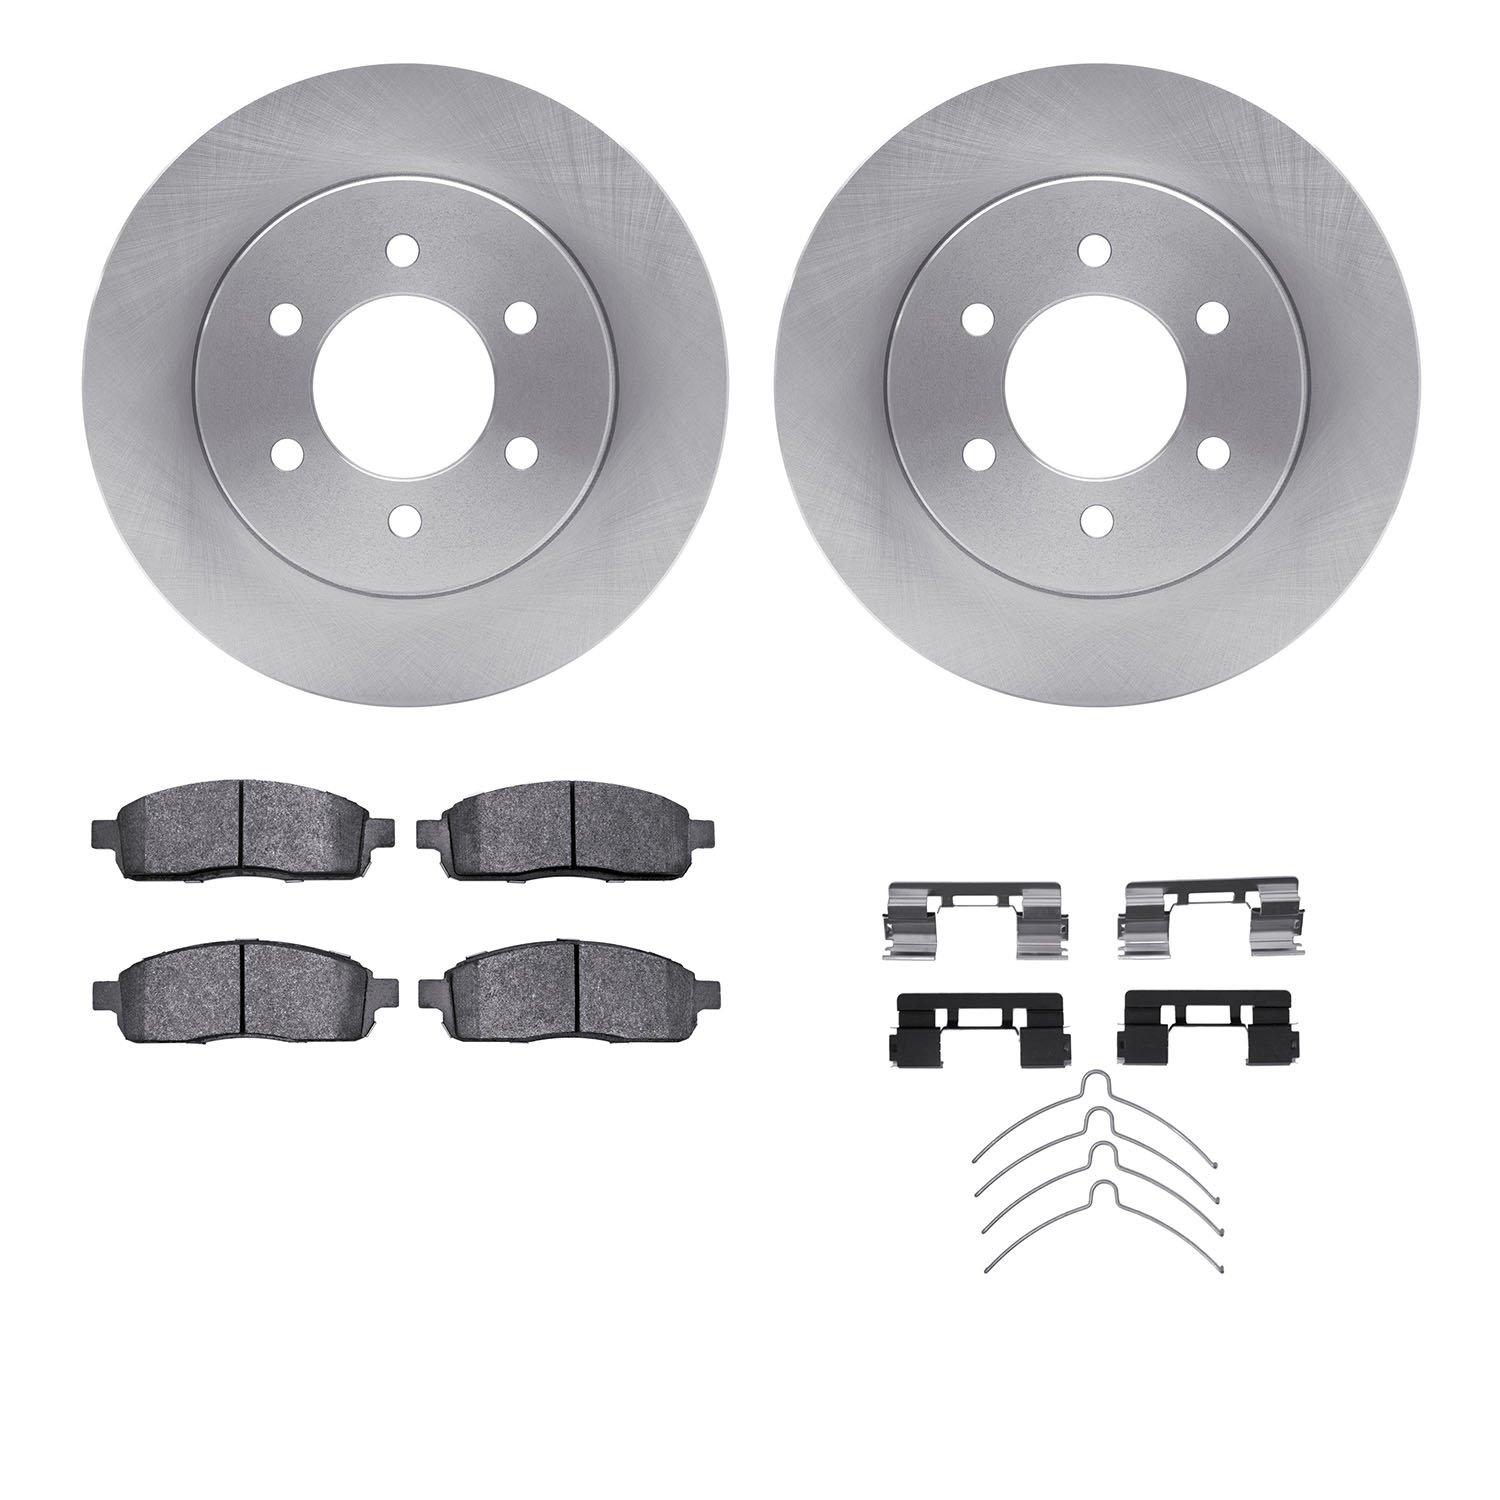 6412-54215 Brake Rotors with Ultimate-Duty Brake Pads Kit & Hardware, 2004-2008 Ford/Lincoln/Mercury/Mazda, Position: Front